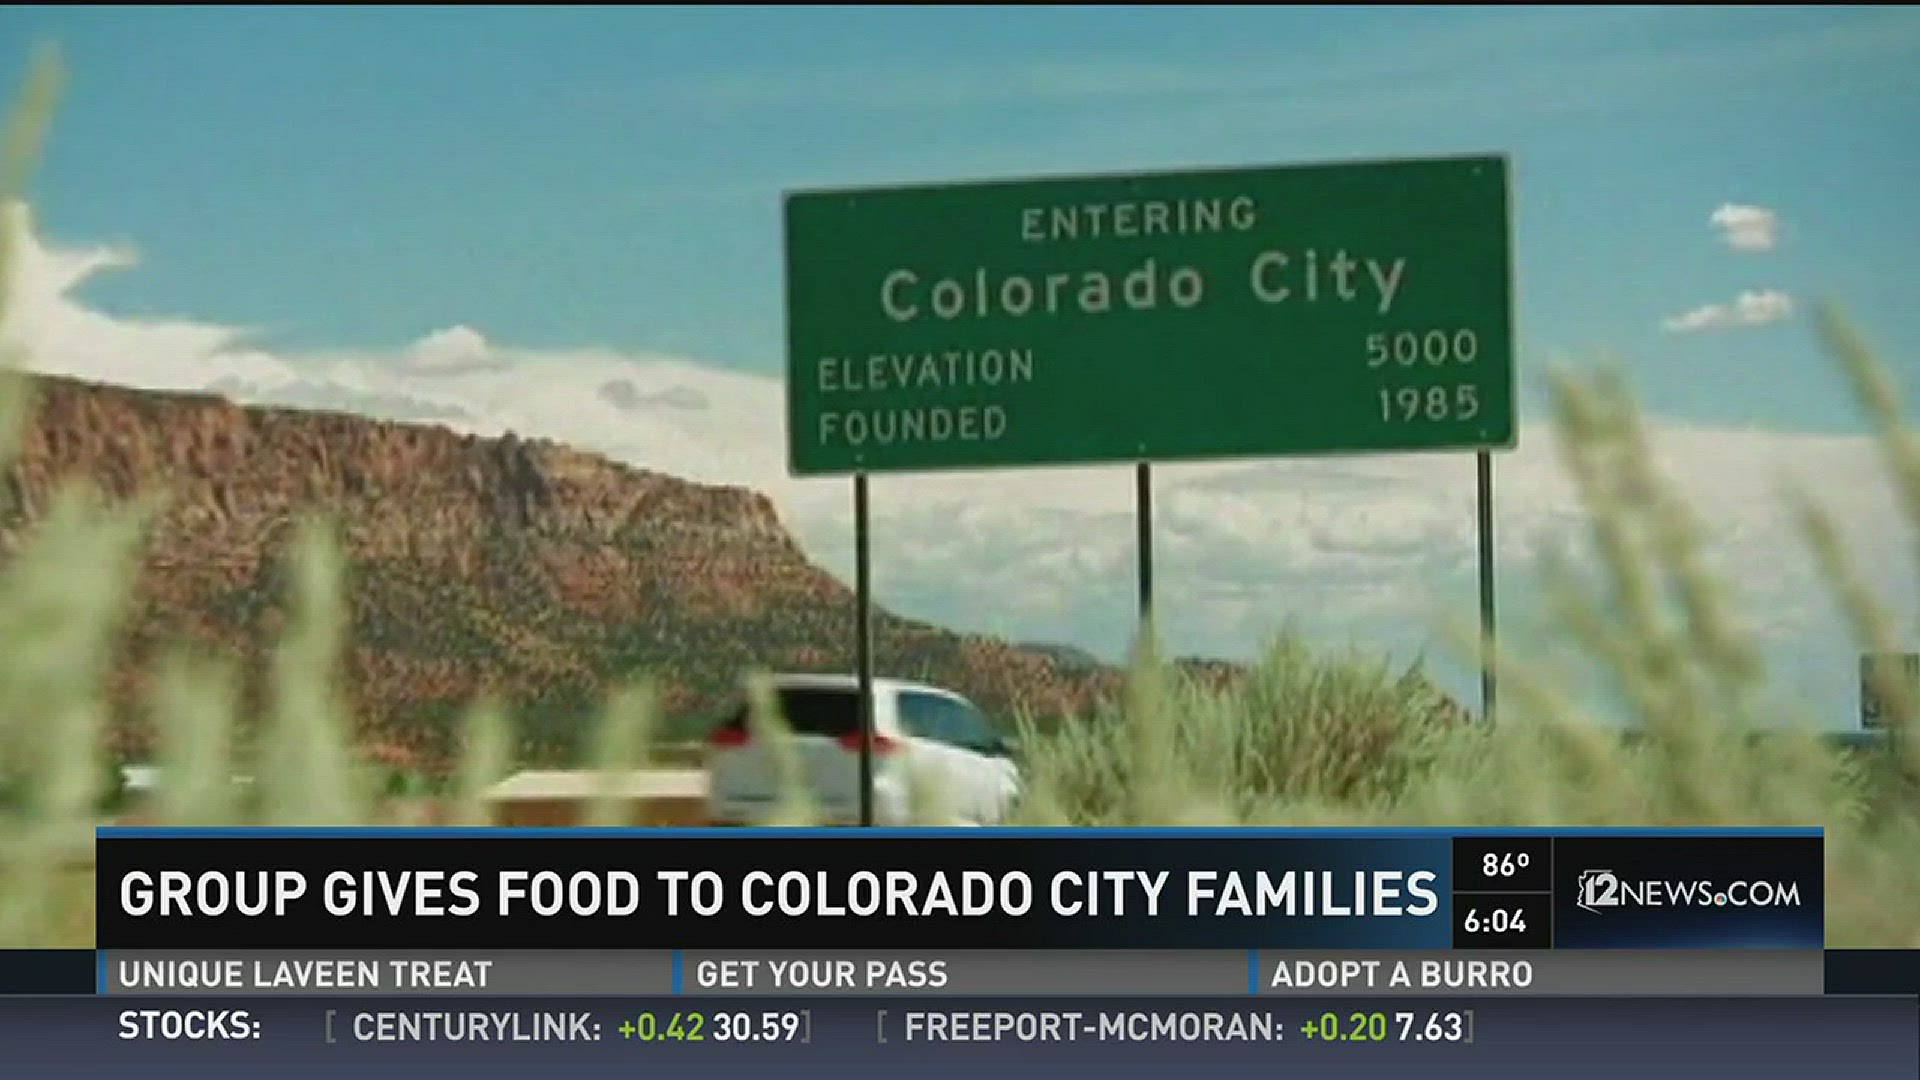 New details on the 11 remembers of the polygamous FLDS church, accused of taking food from needy members